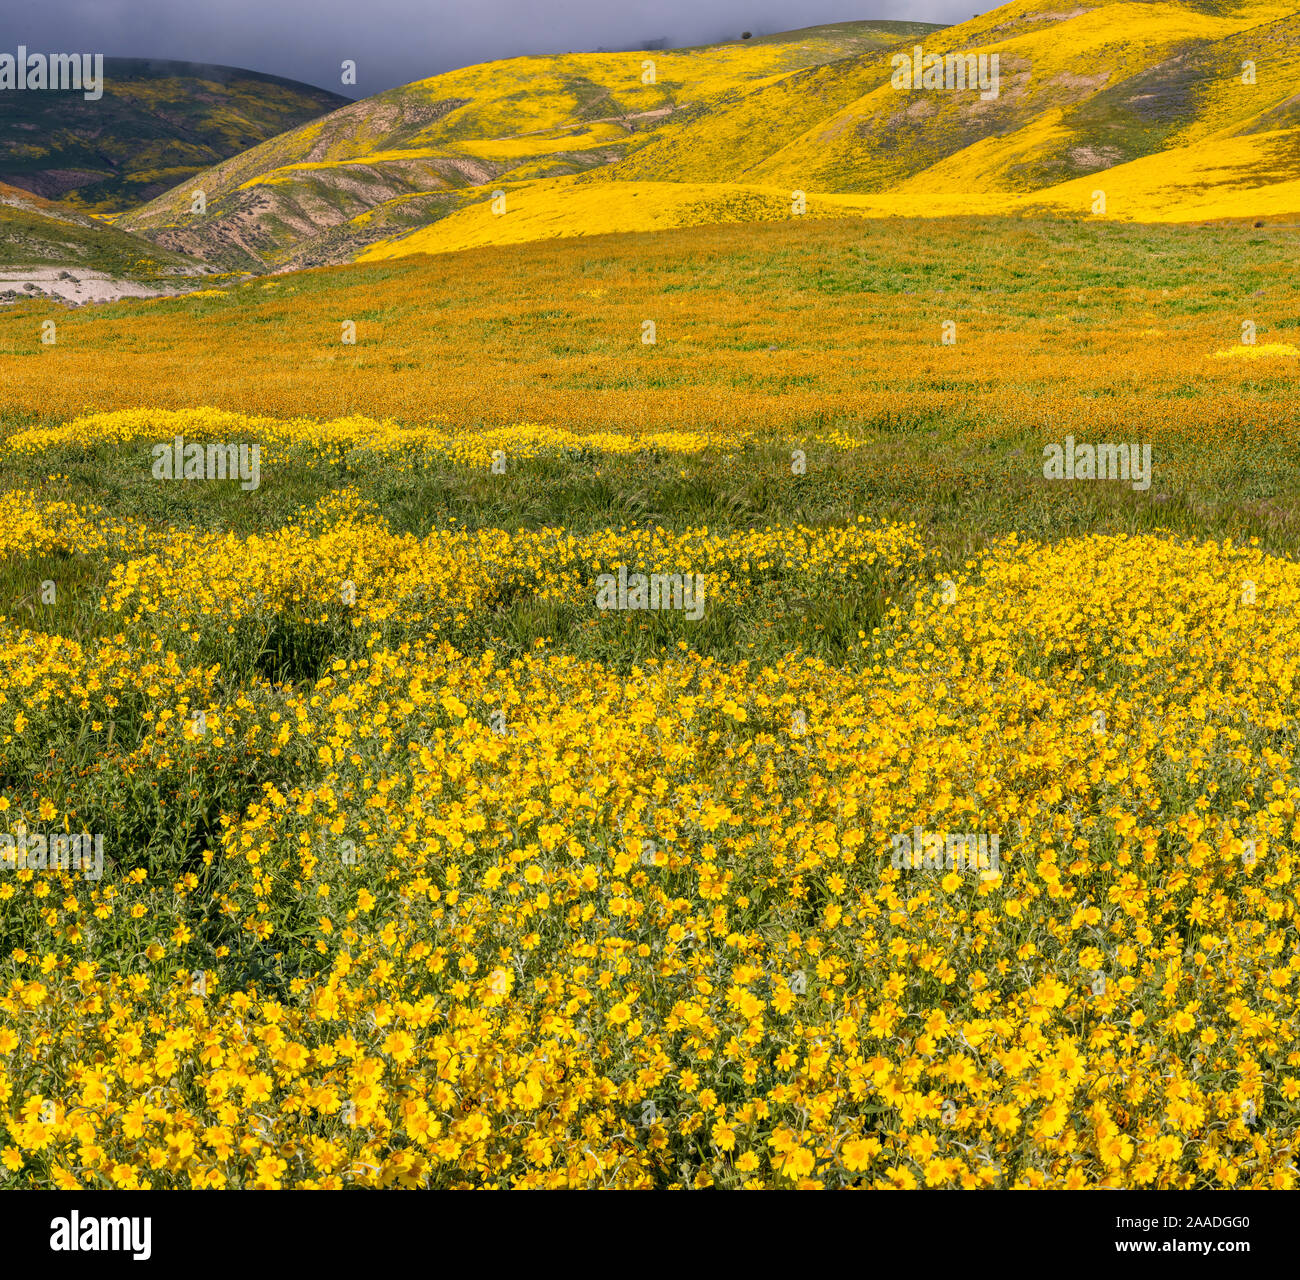 Massive wildflower display with Lanceleaf monolopia (Monolopia lanceleota) Tidy-tips (Layia platyglossa)  and the Temblor Range carpeted with flower in the background. Carrizo Plain National Monument, California, USA, March 2017. Stock Photo